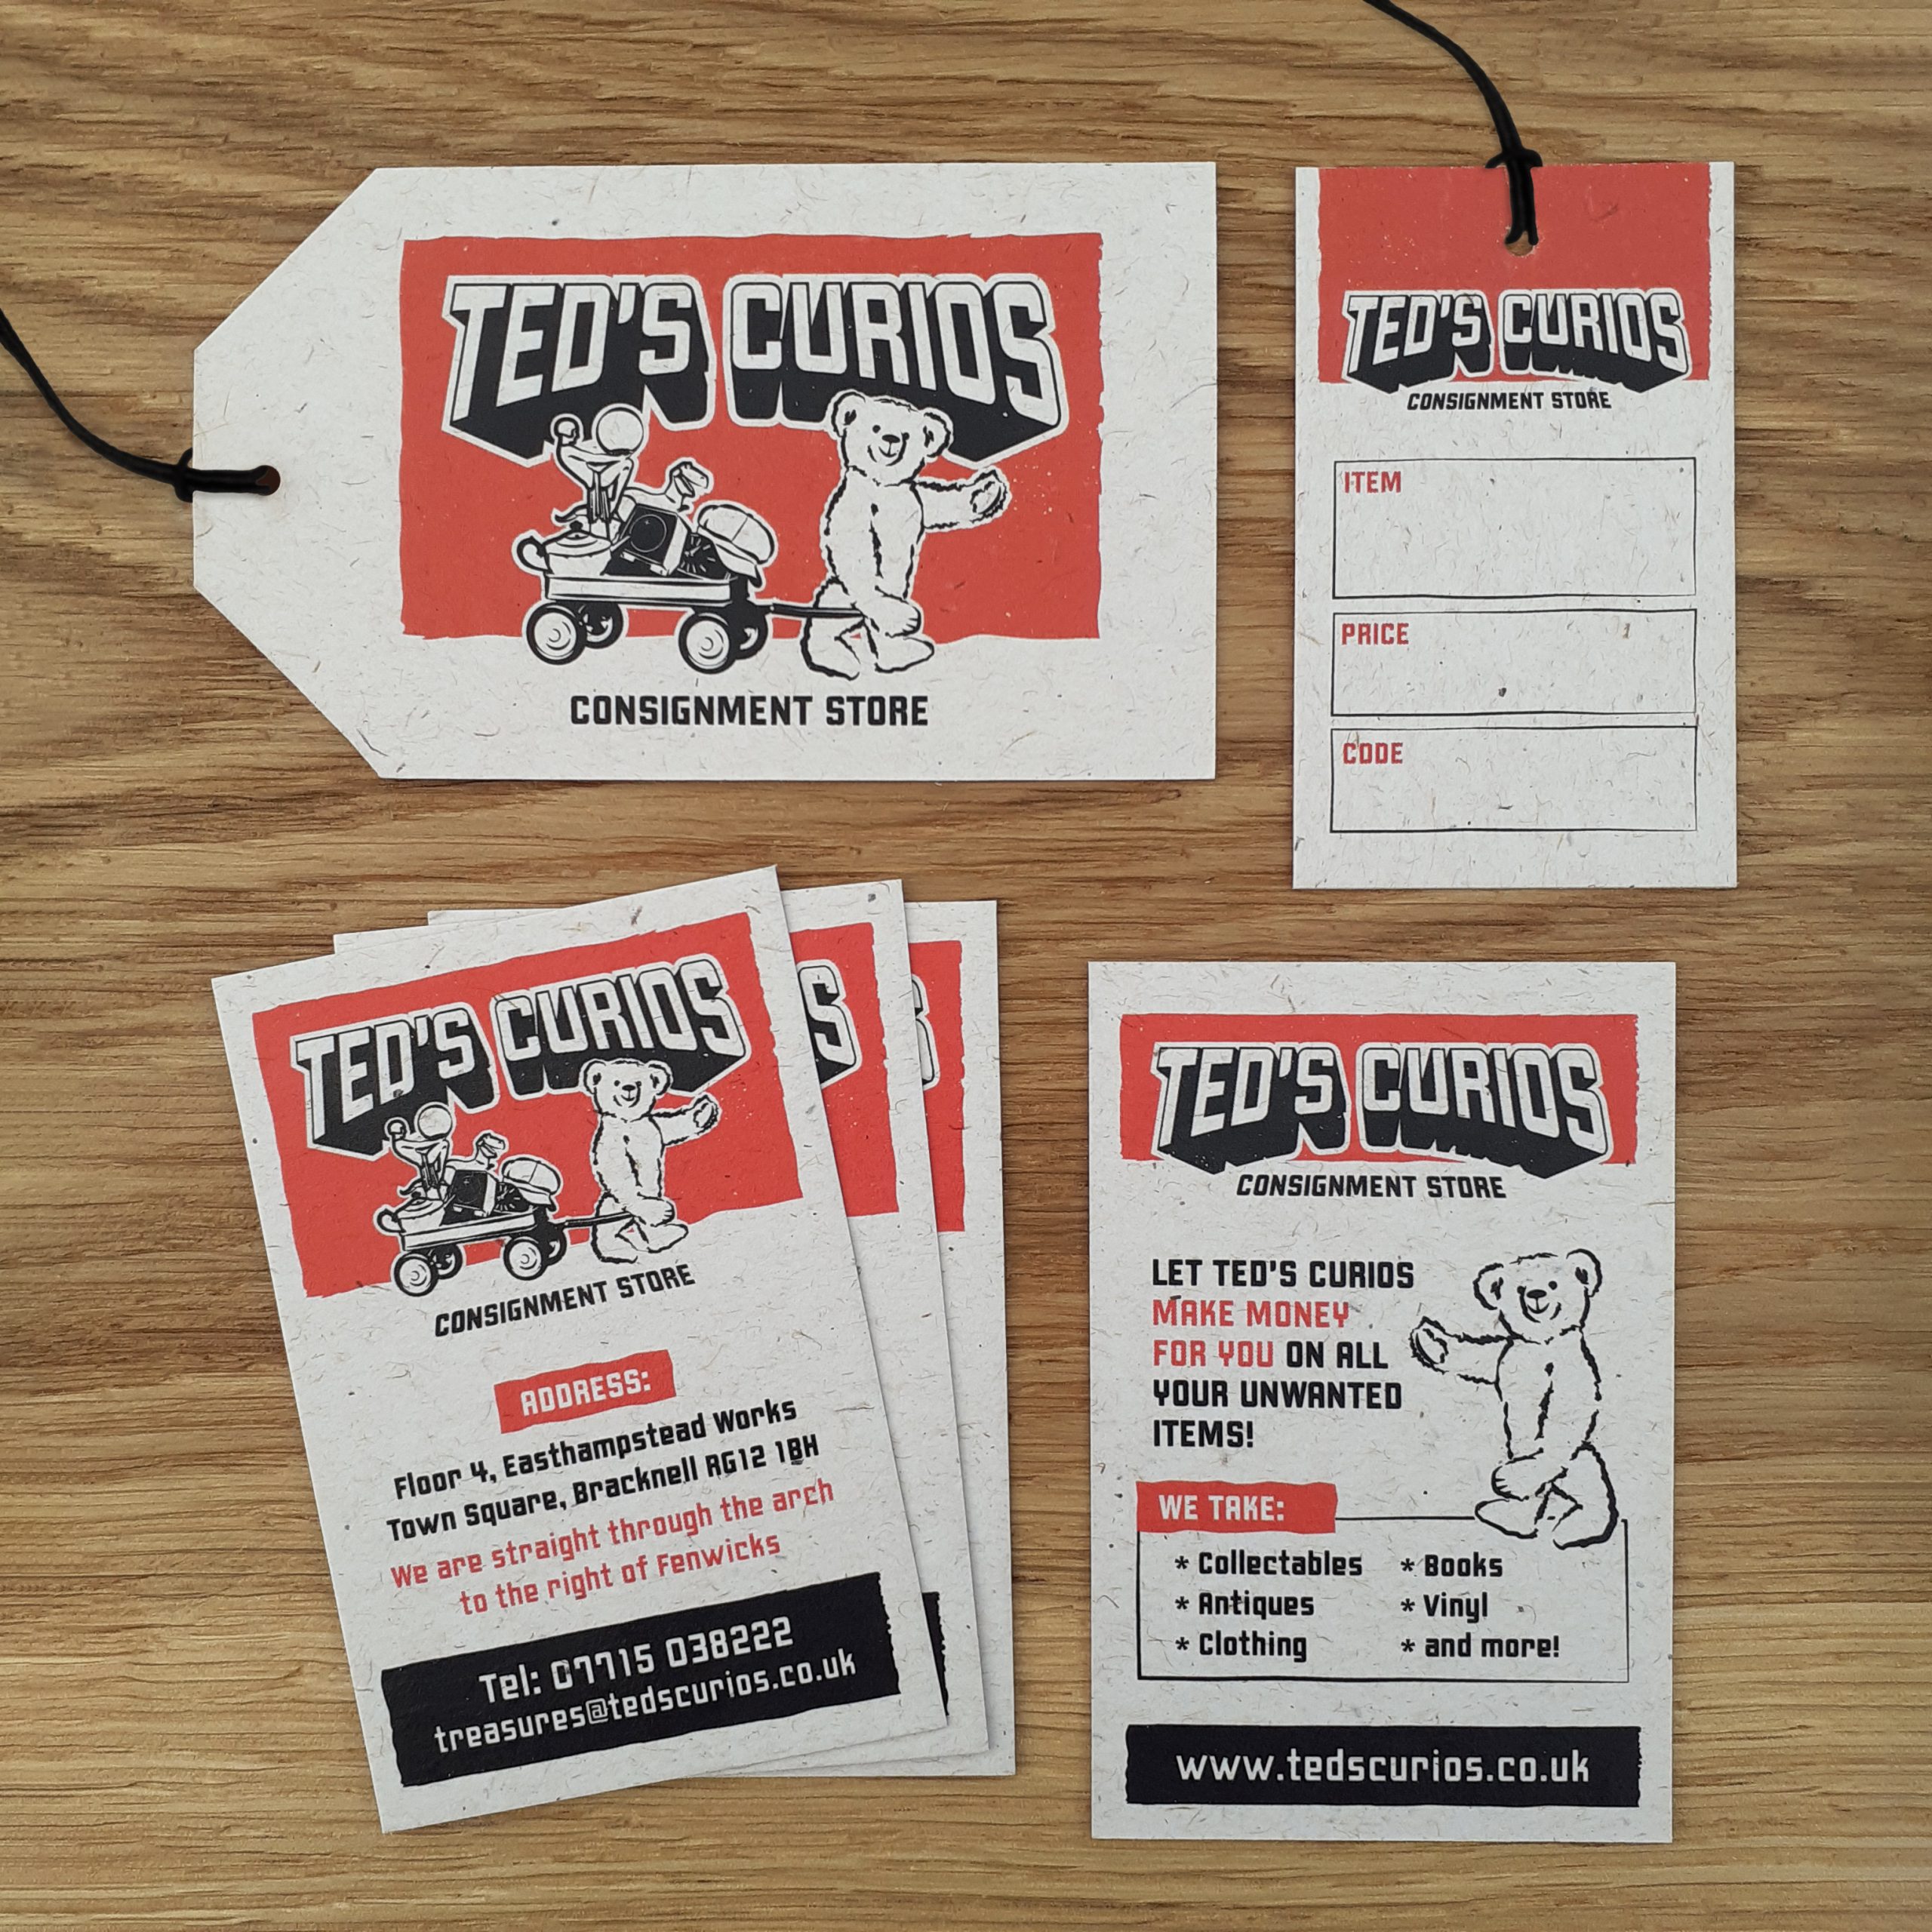 Printed tags and business cards